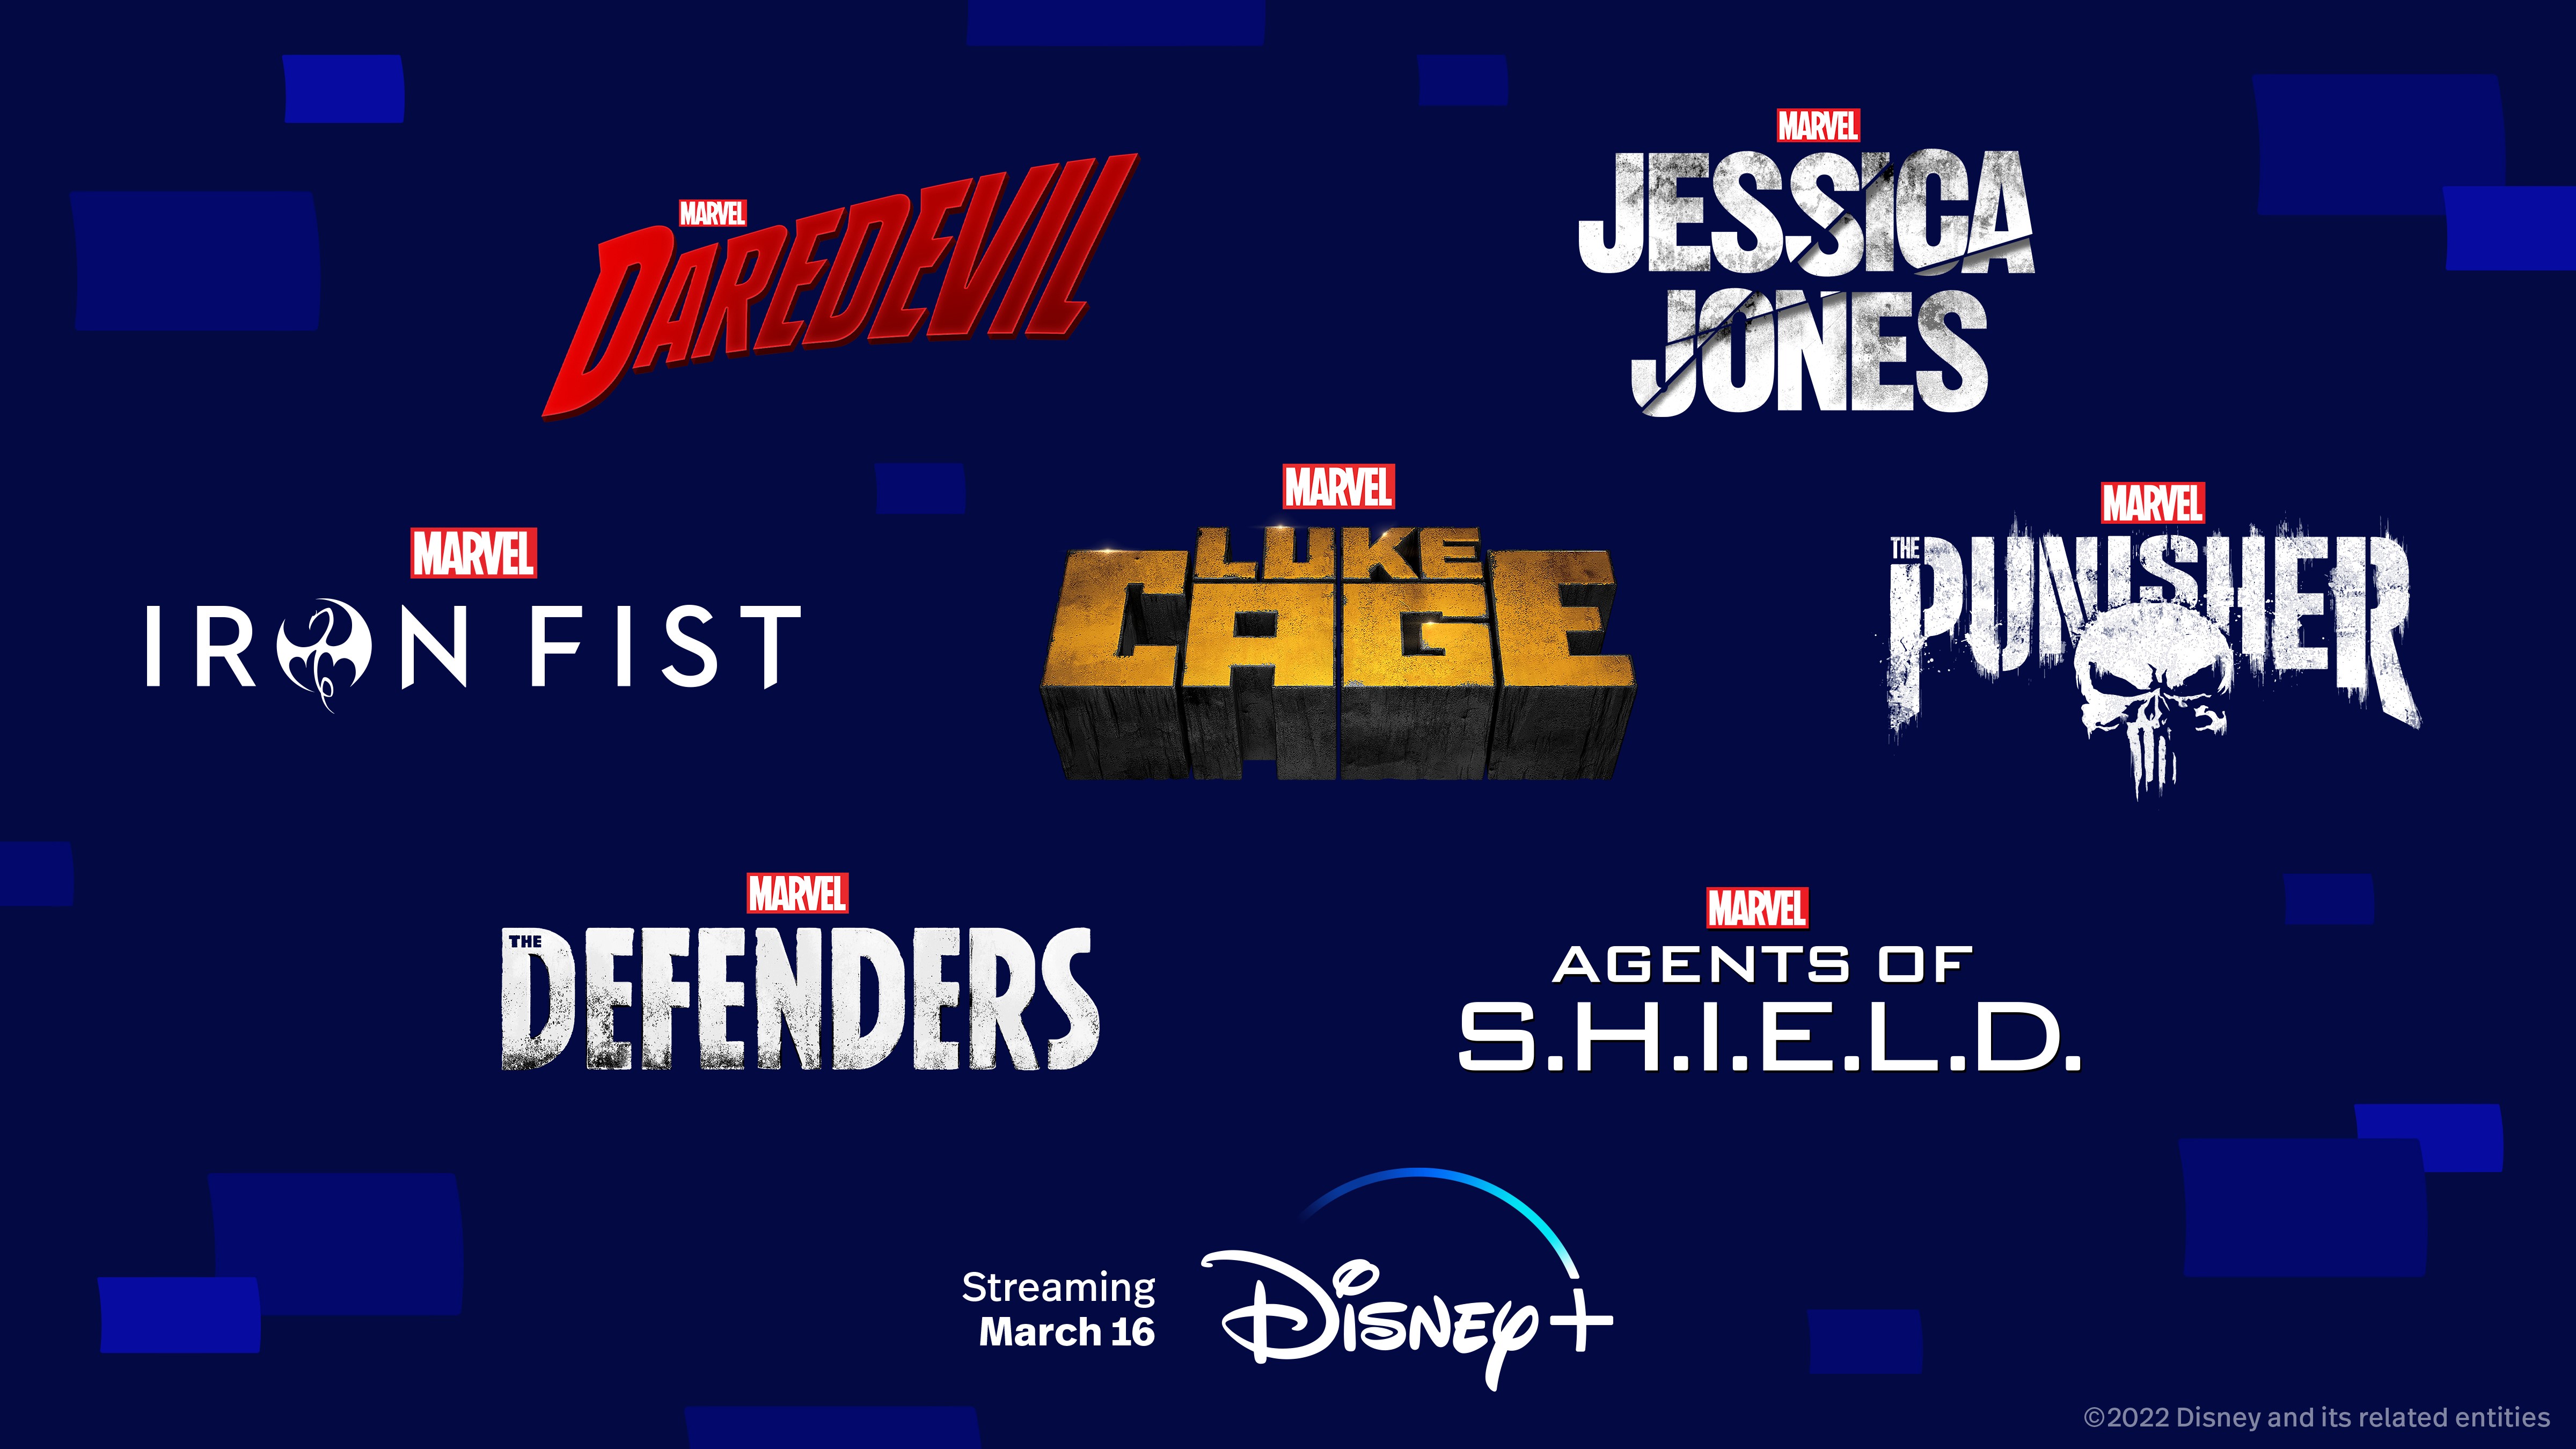 Marvel’s Defenders shows coming to Disney Plus in March What to Watch